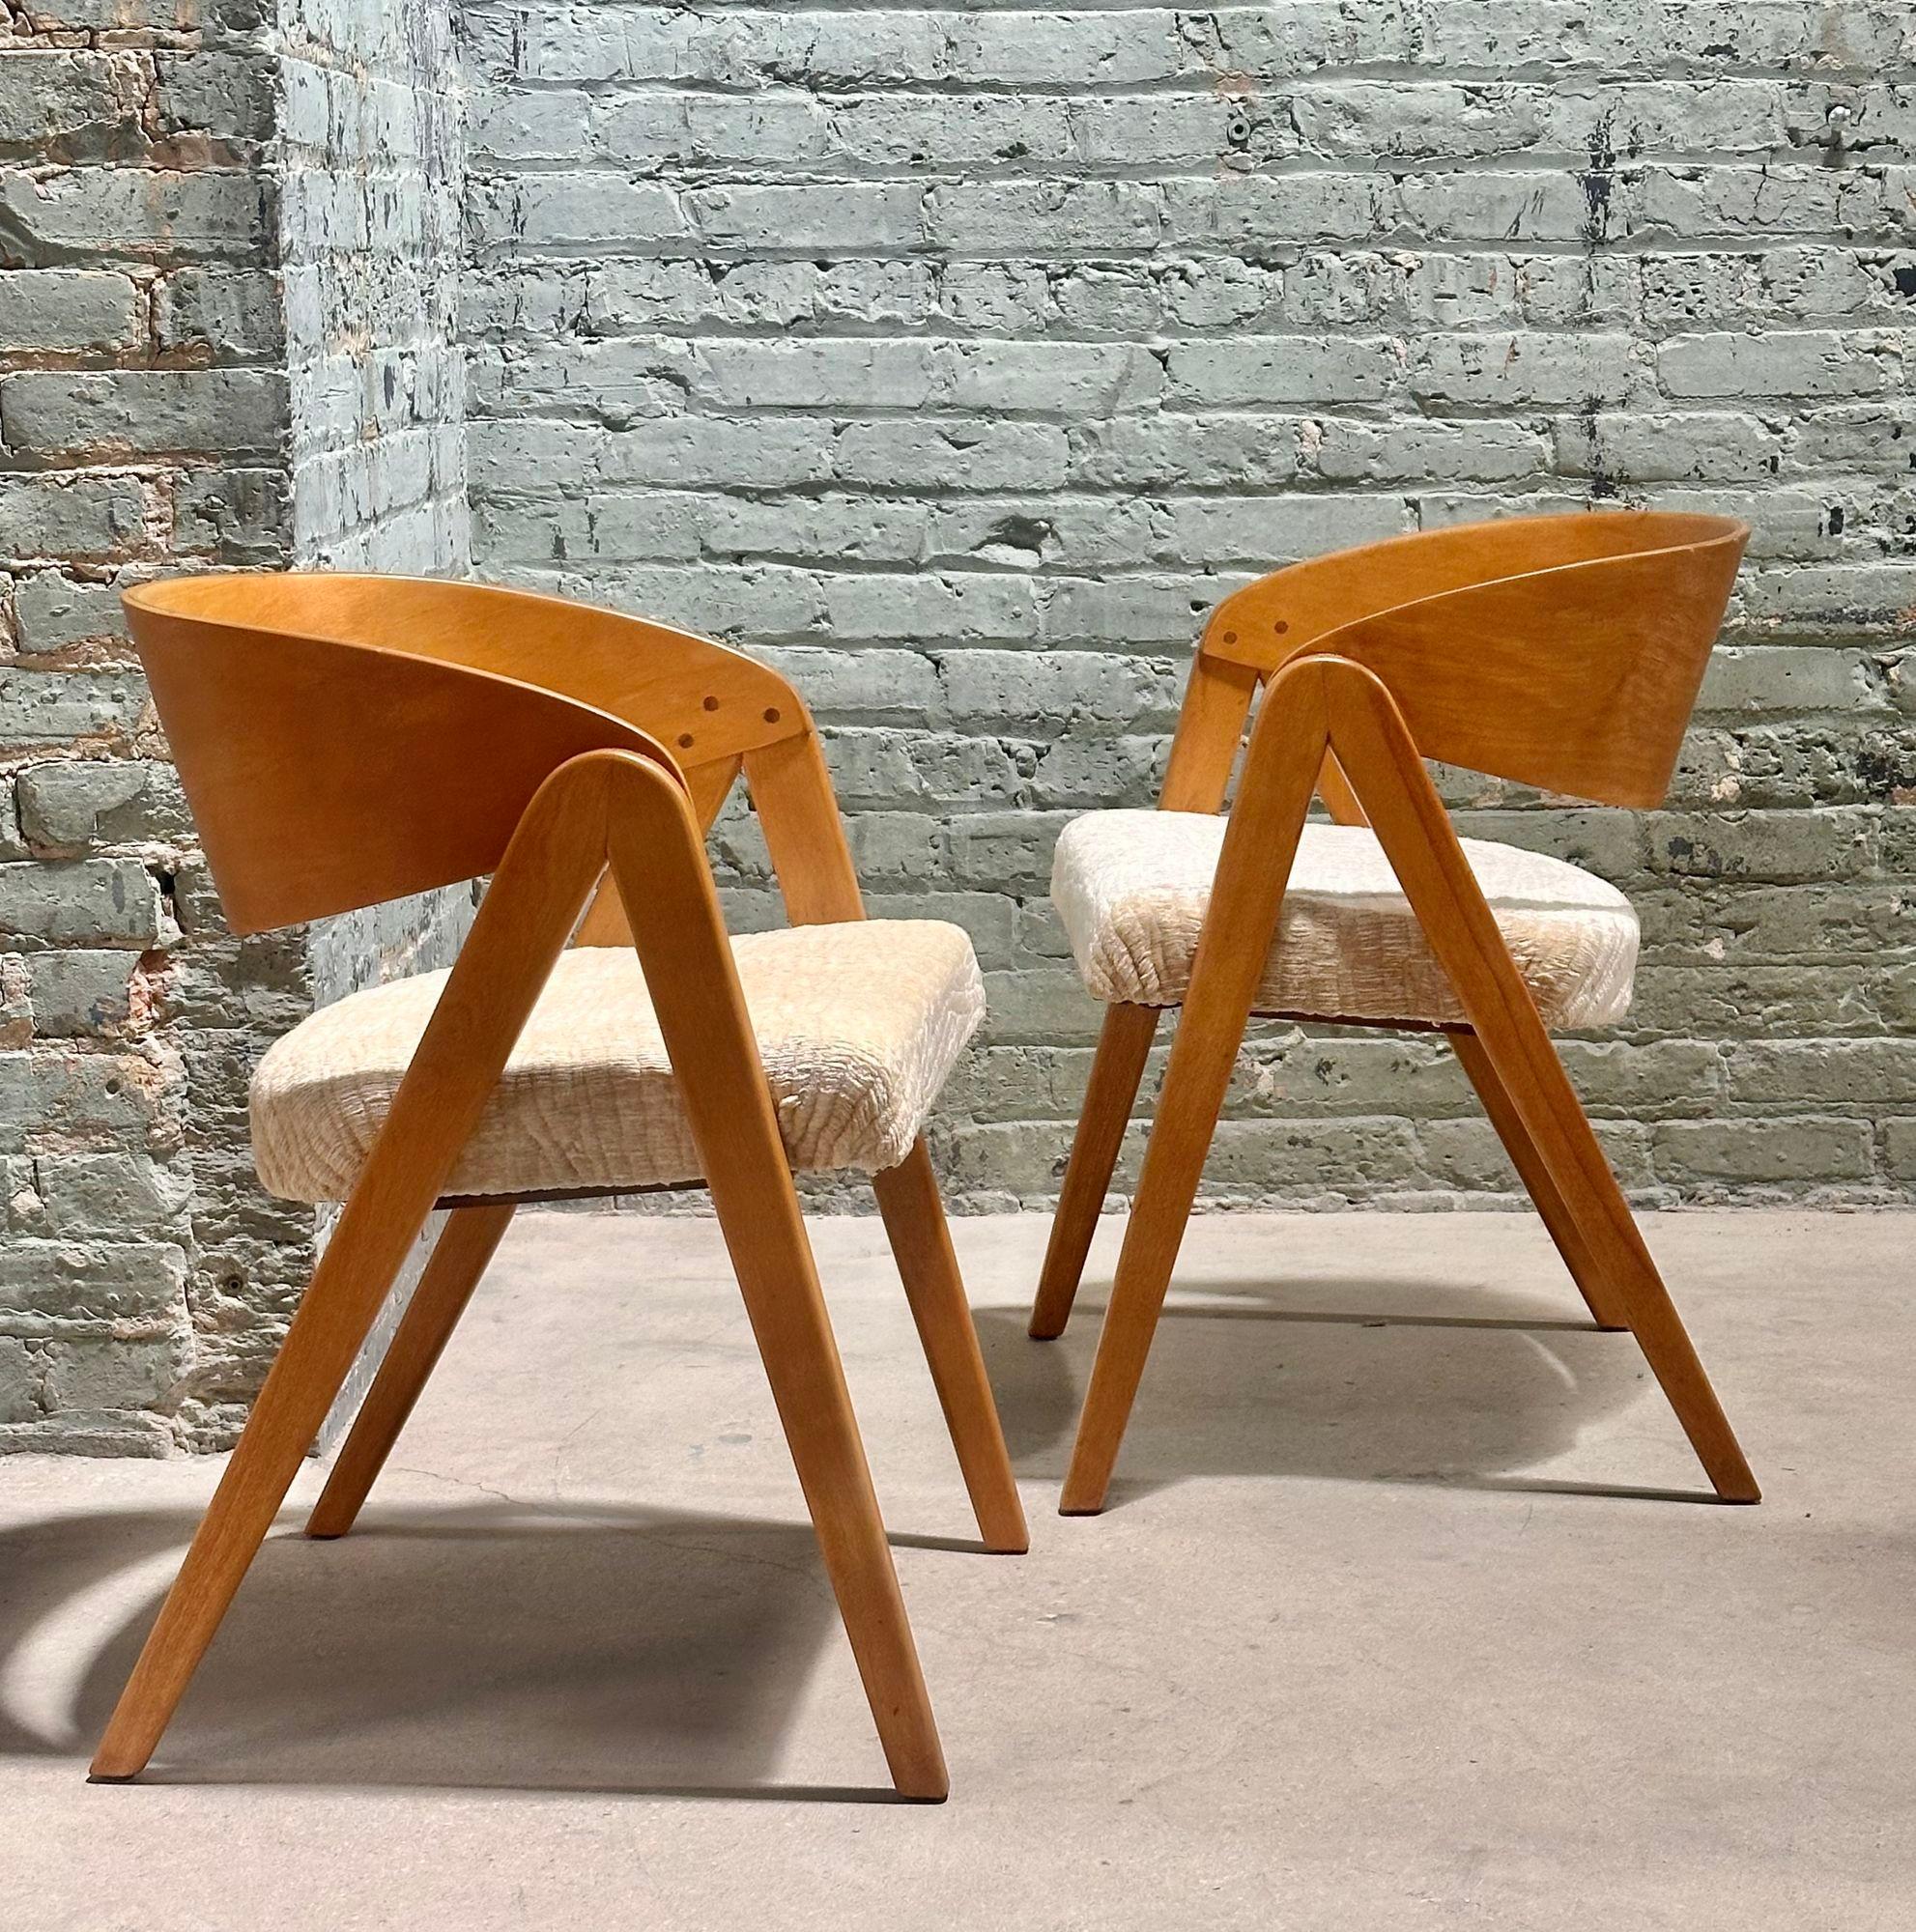 Pair Alan Gould Compass Dining/Side Chair, 1950. Restored and reupholstered.
Measure 27.5